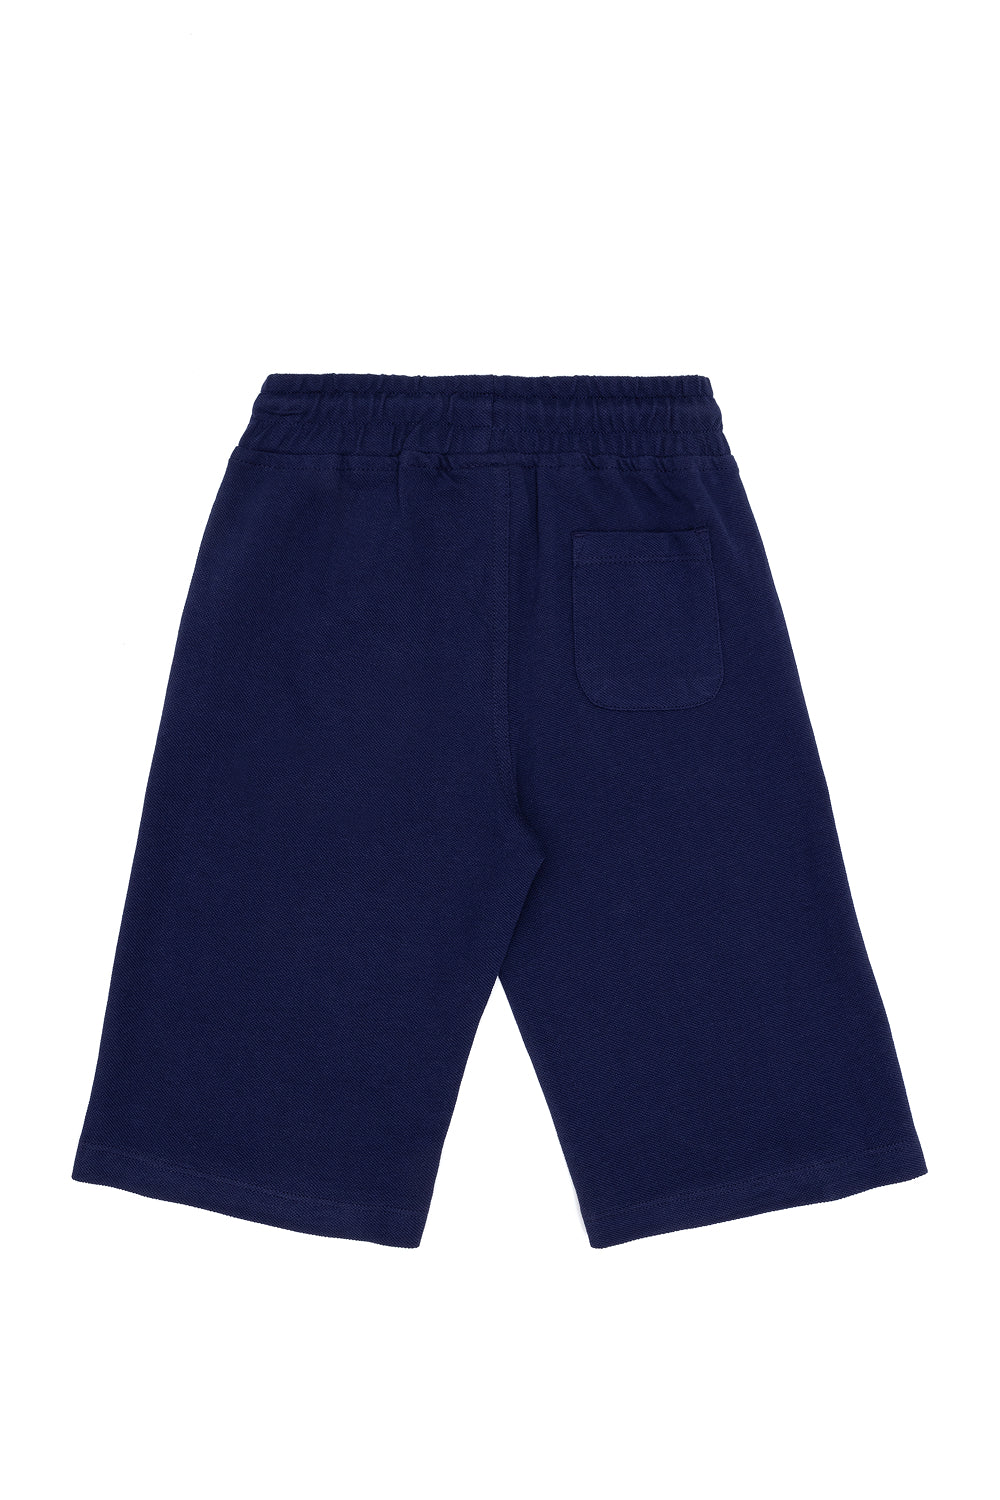 Blue Knitted Shorts With Black Drawstrings